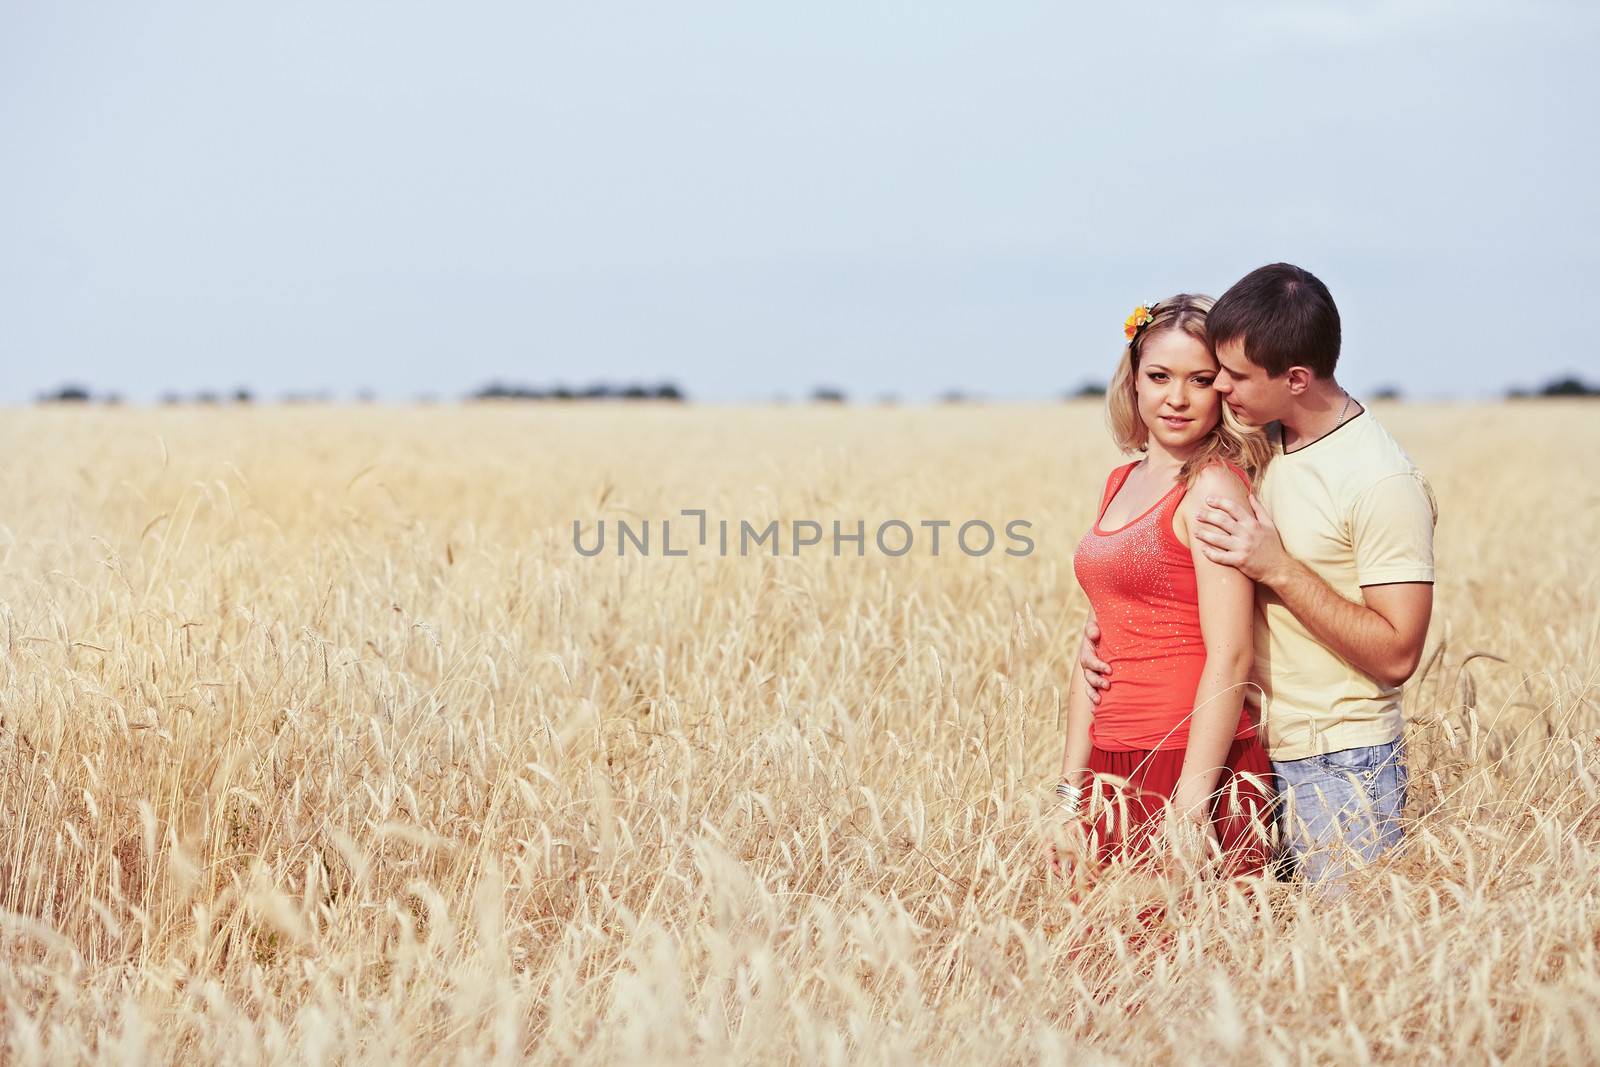 Man embraces a girl in a wheat field